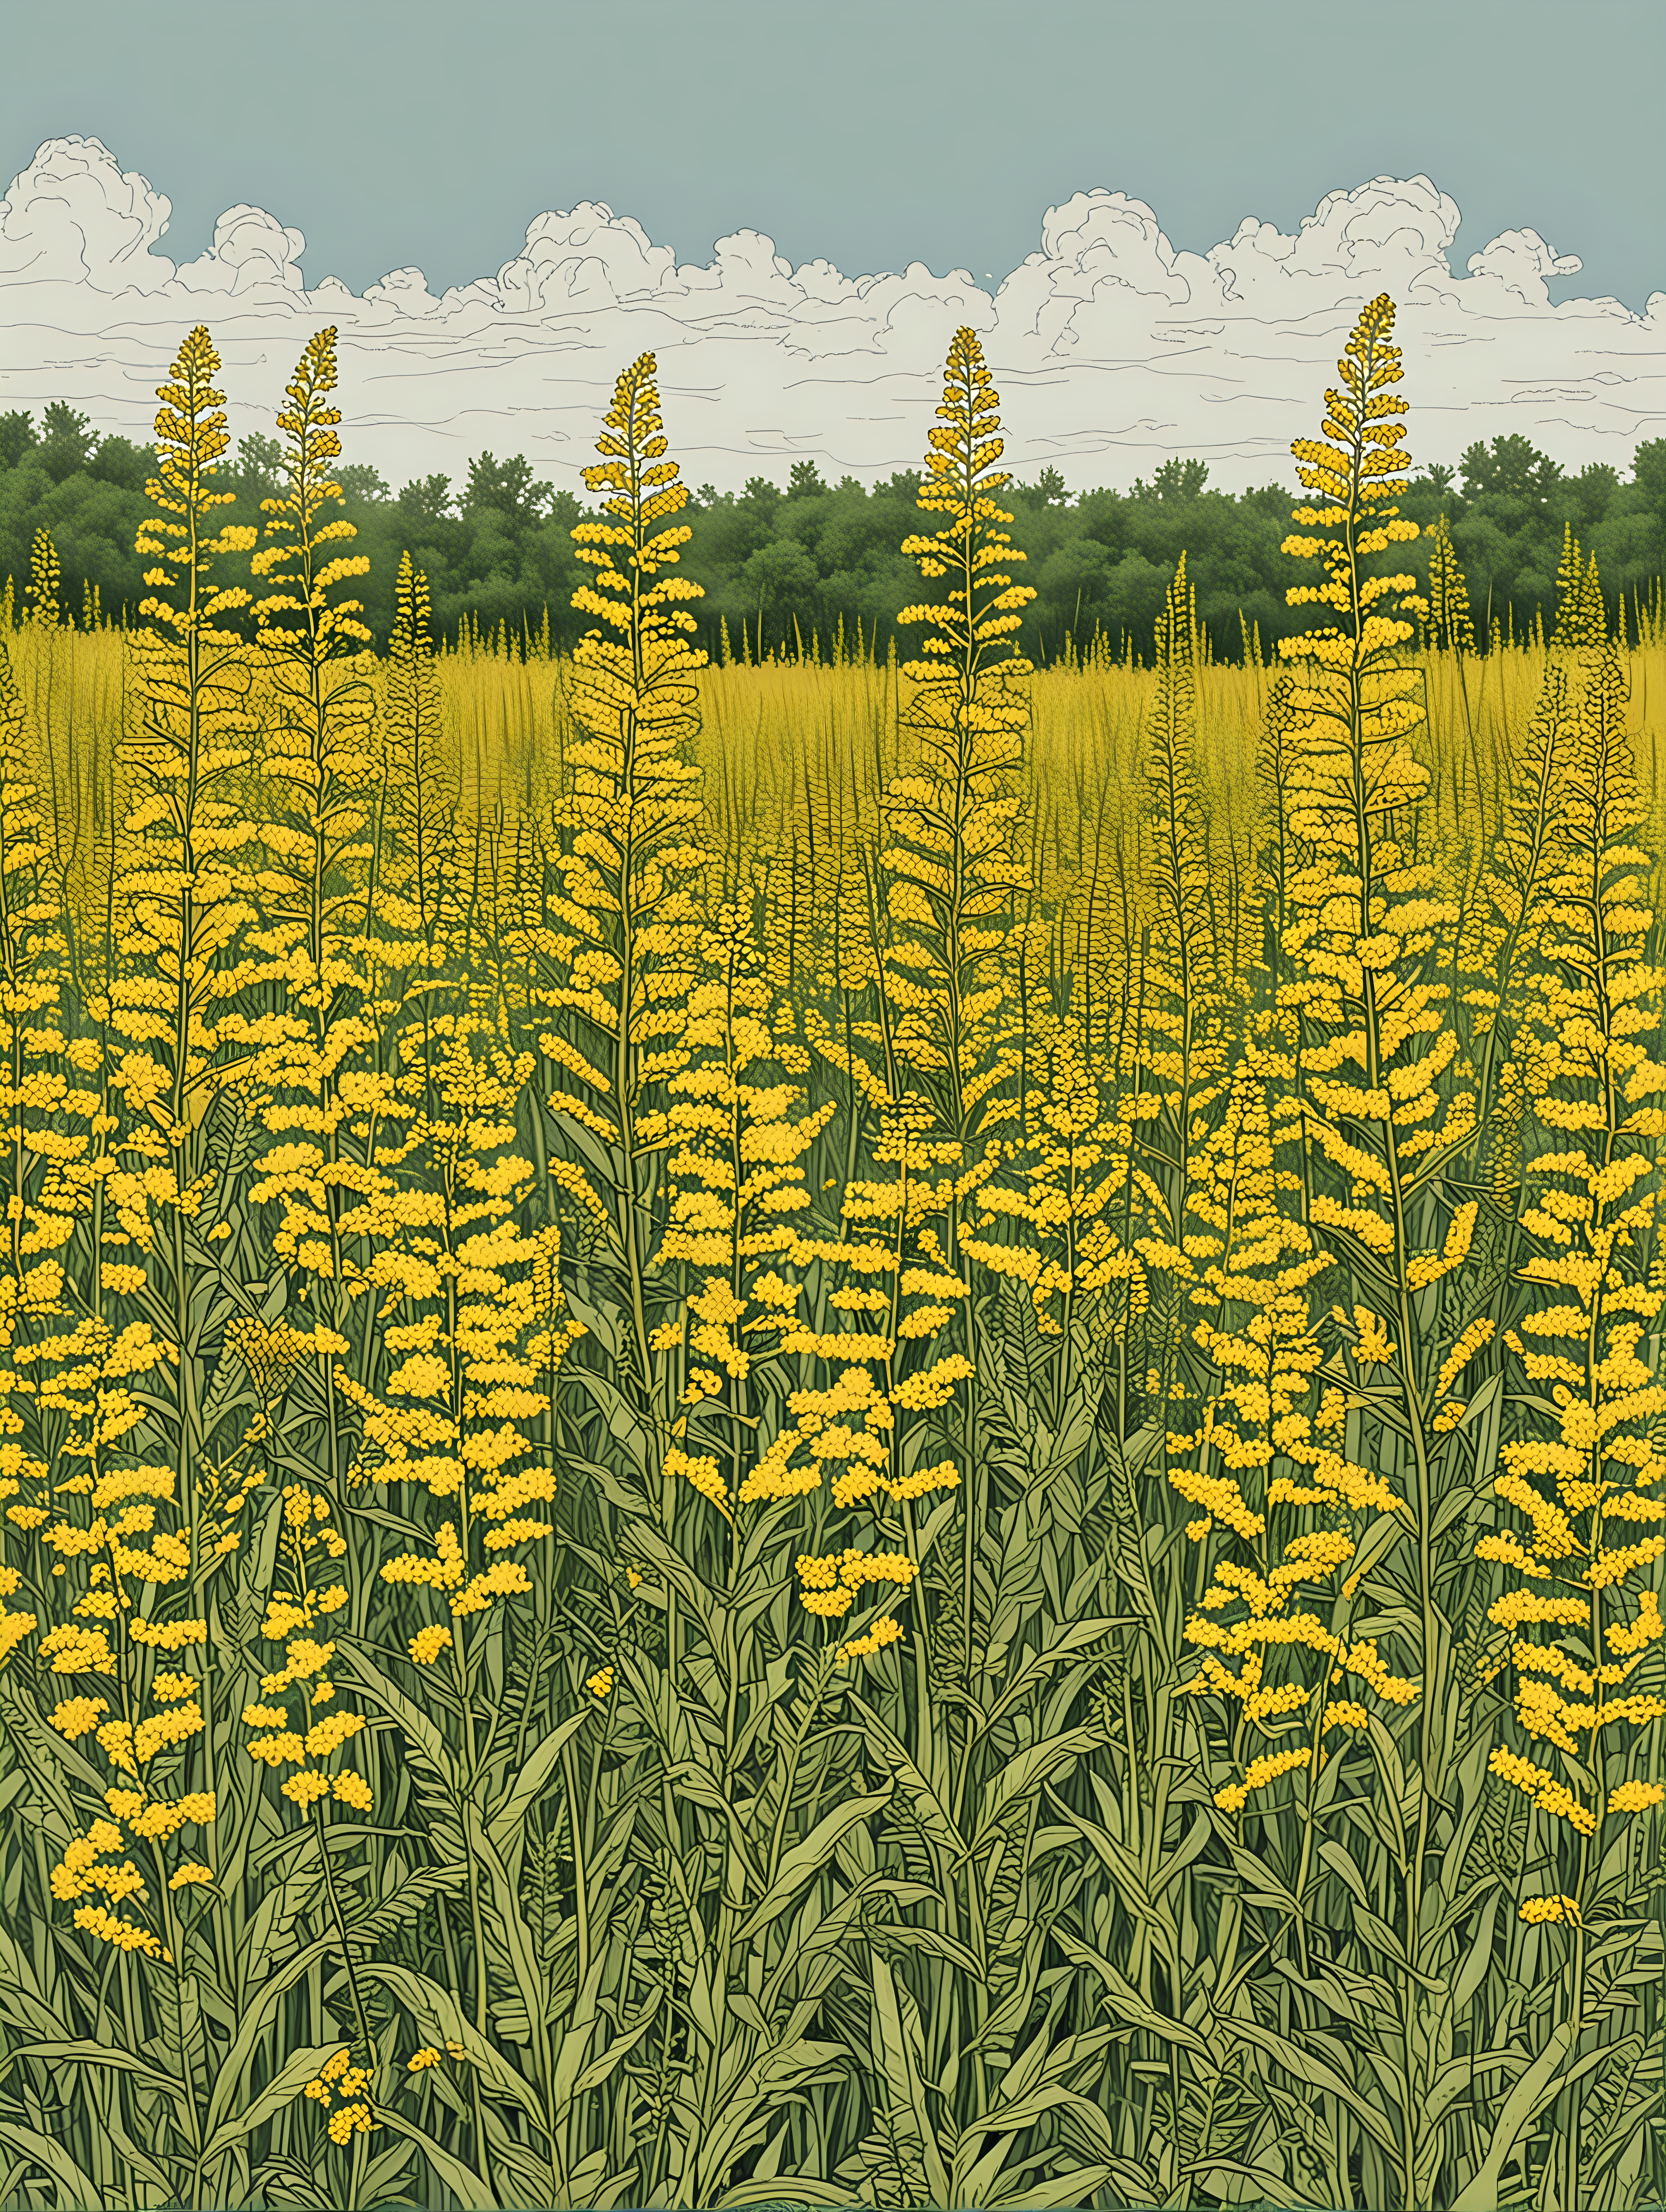 Tranquil Field of Goldenrod Minimalistic Sketch in Warm Tones